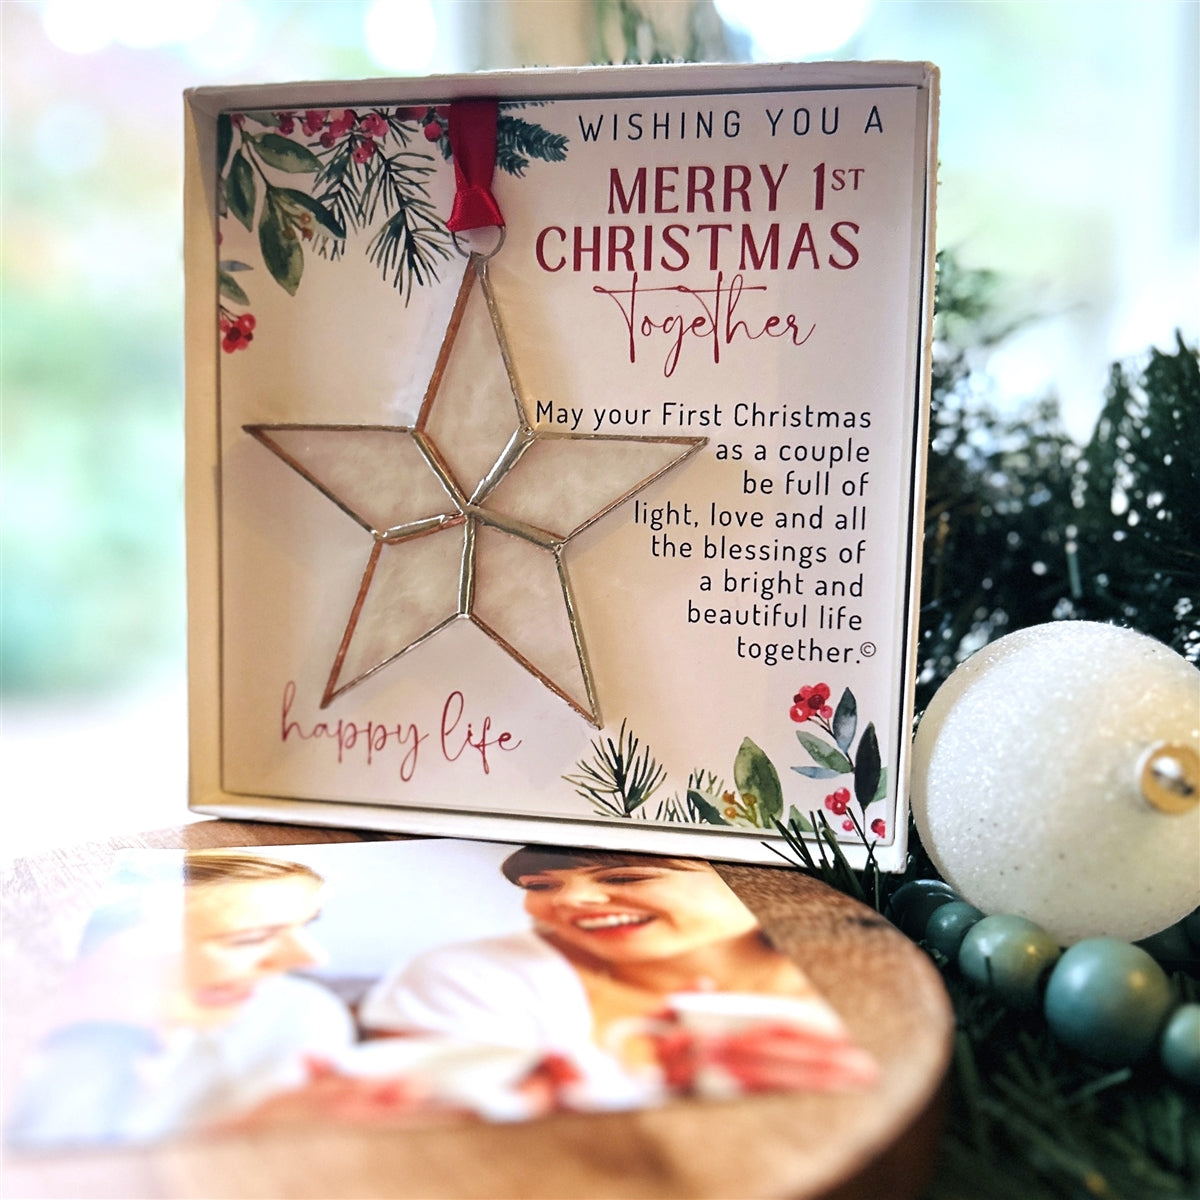 First Christmas Together star ornament boxed with a photo of a laughing happy couple in the foreground.